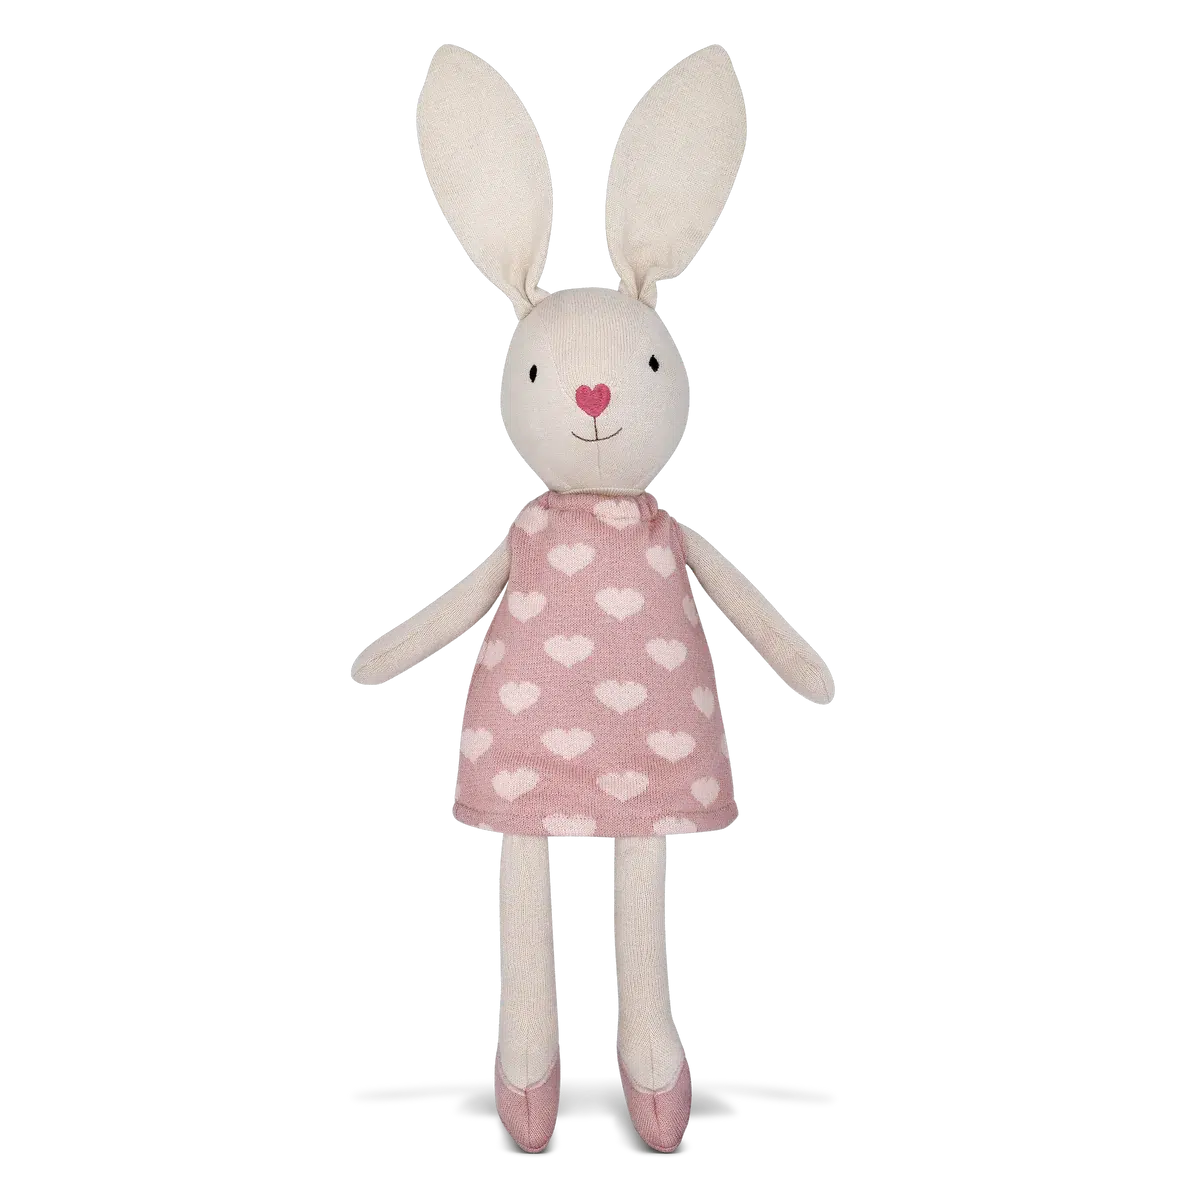 Front view of Knit Bunny Plush-Luella standing.